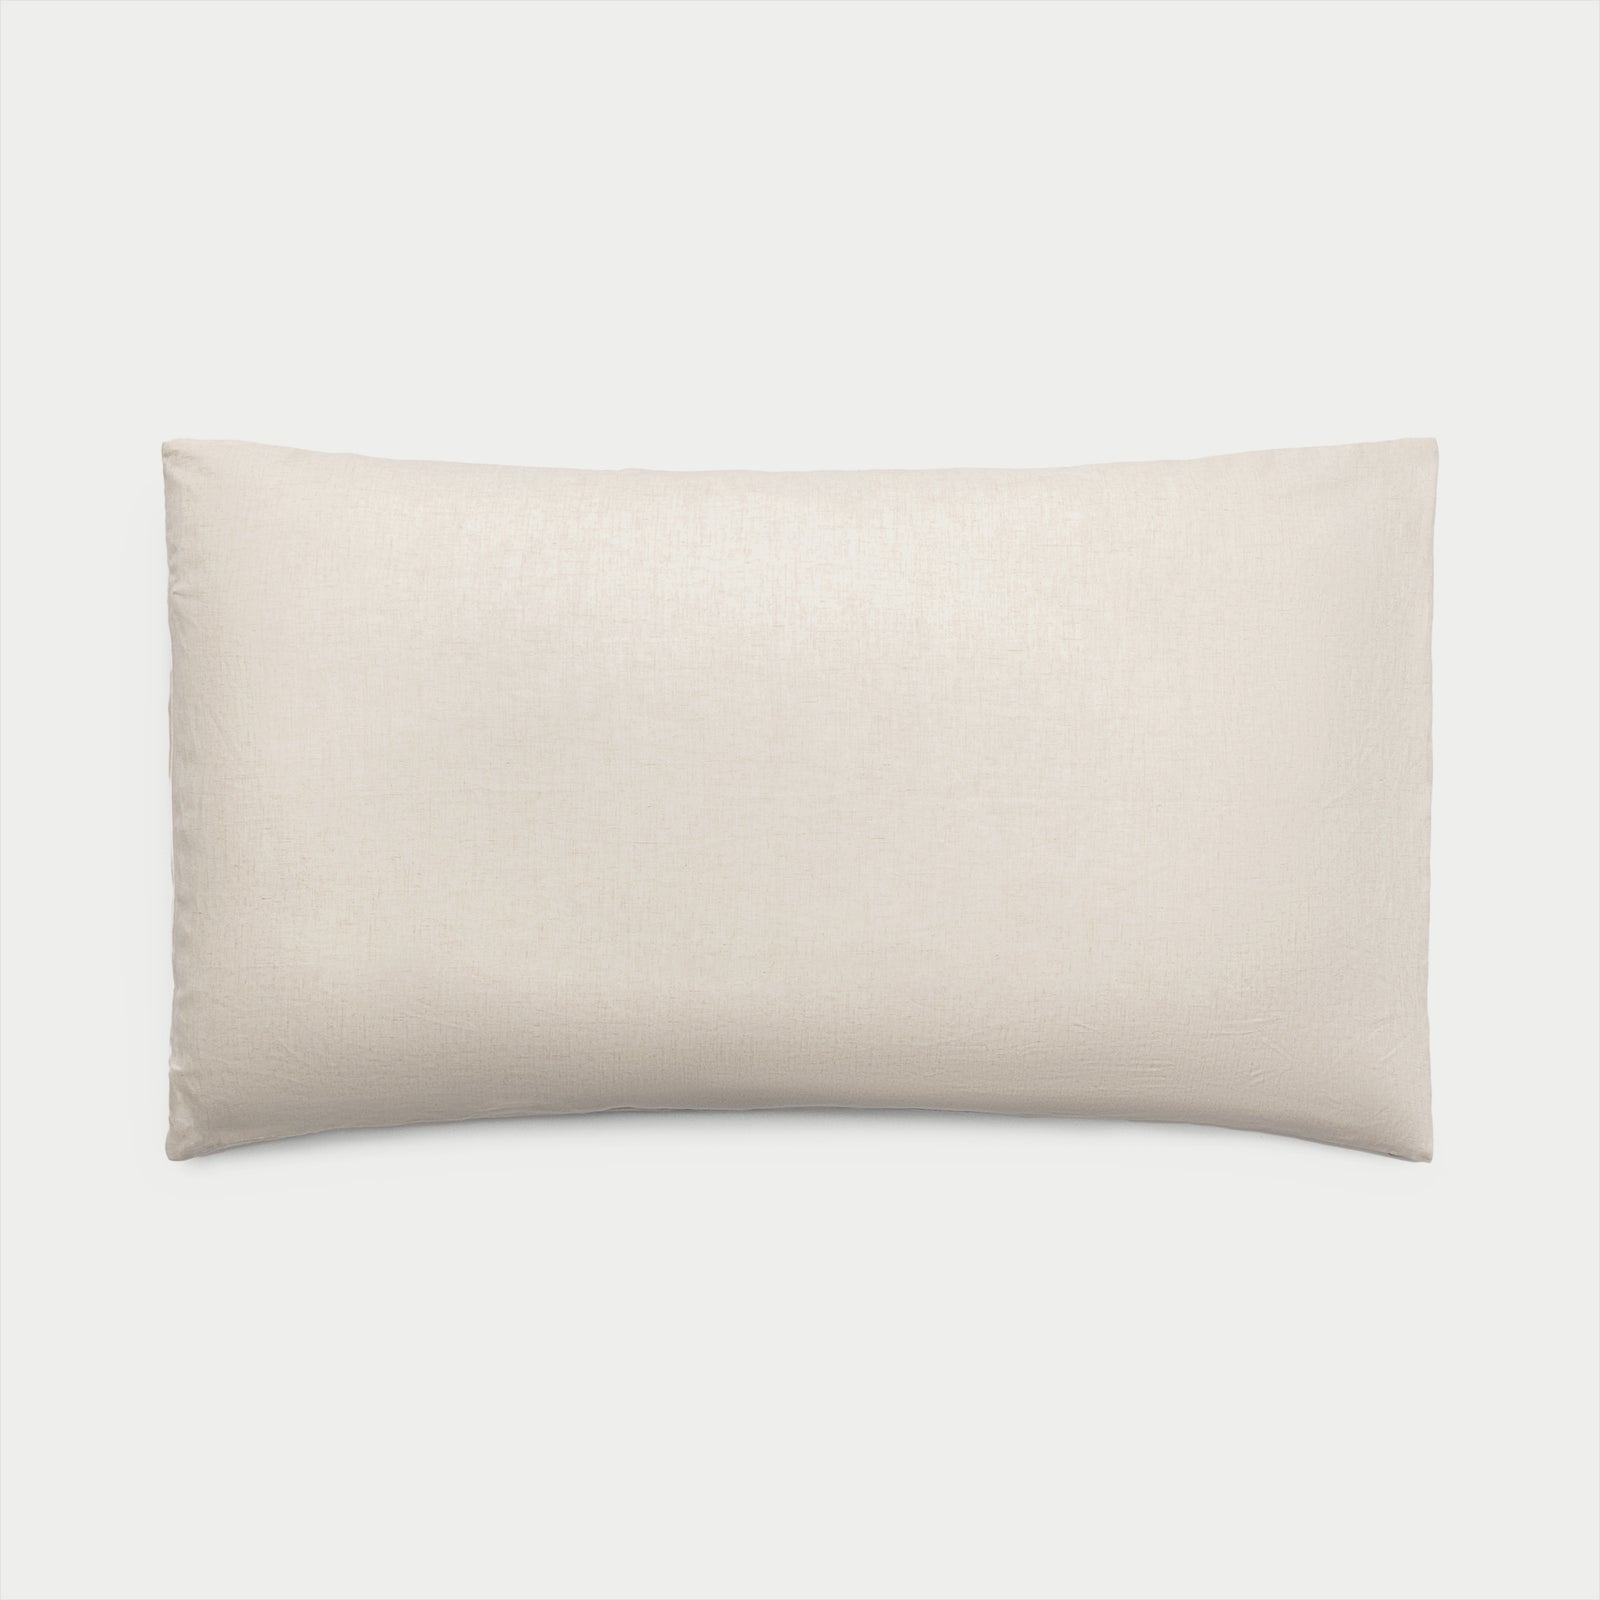 Supreme Pillow Shams to Match Any Bedroom's Decor